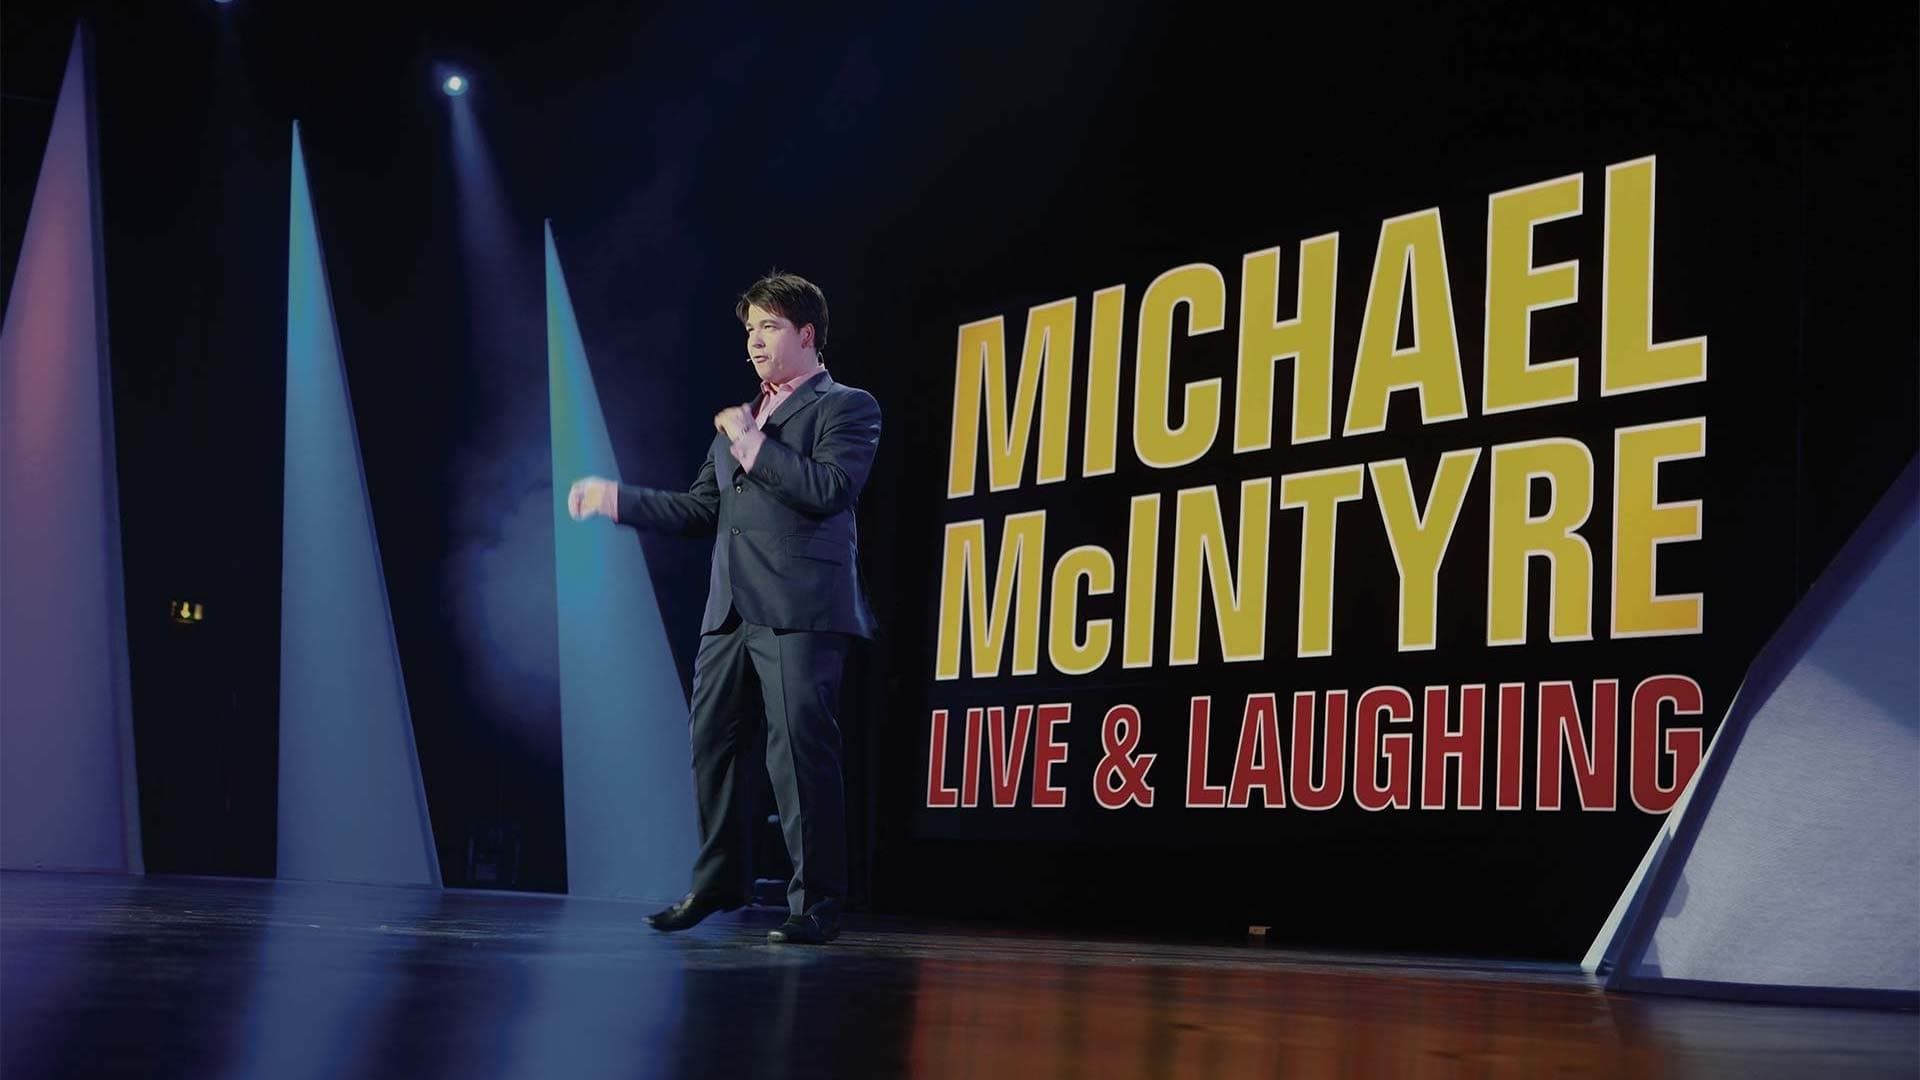 Michael McIntyre: Live & Laughing background